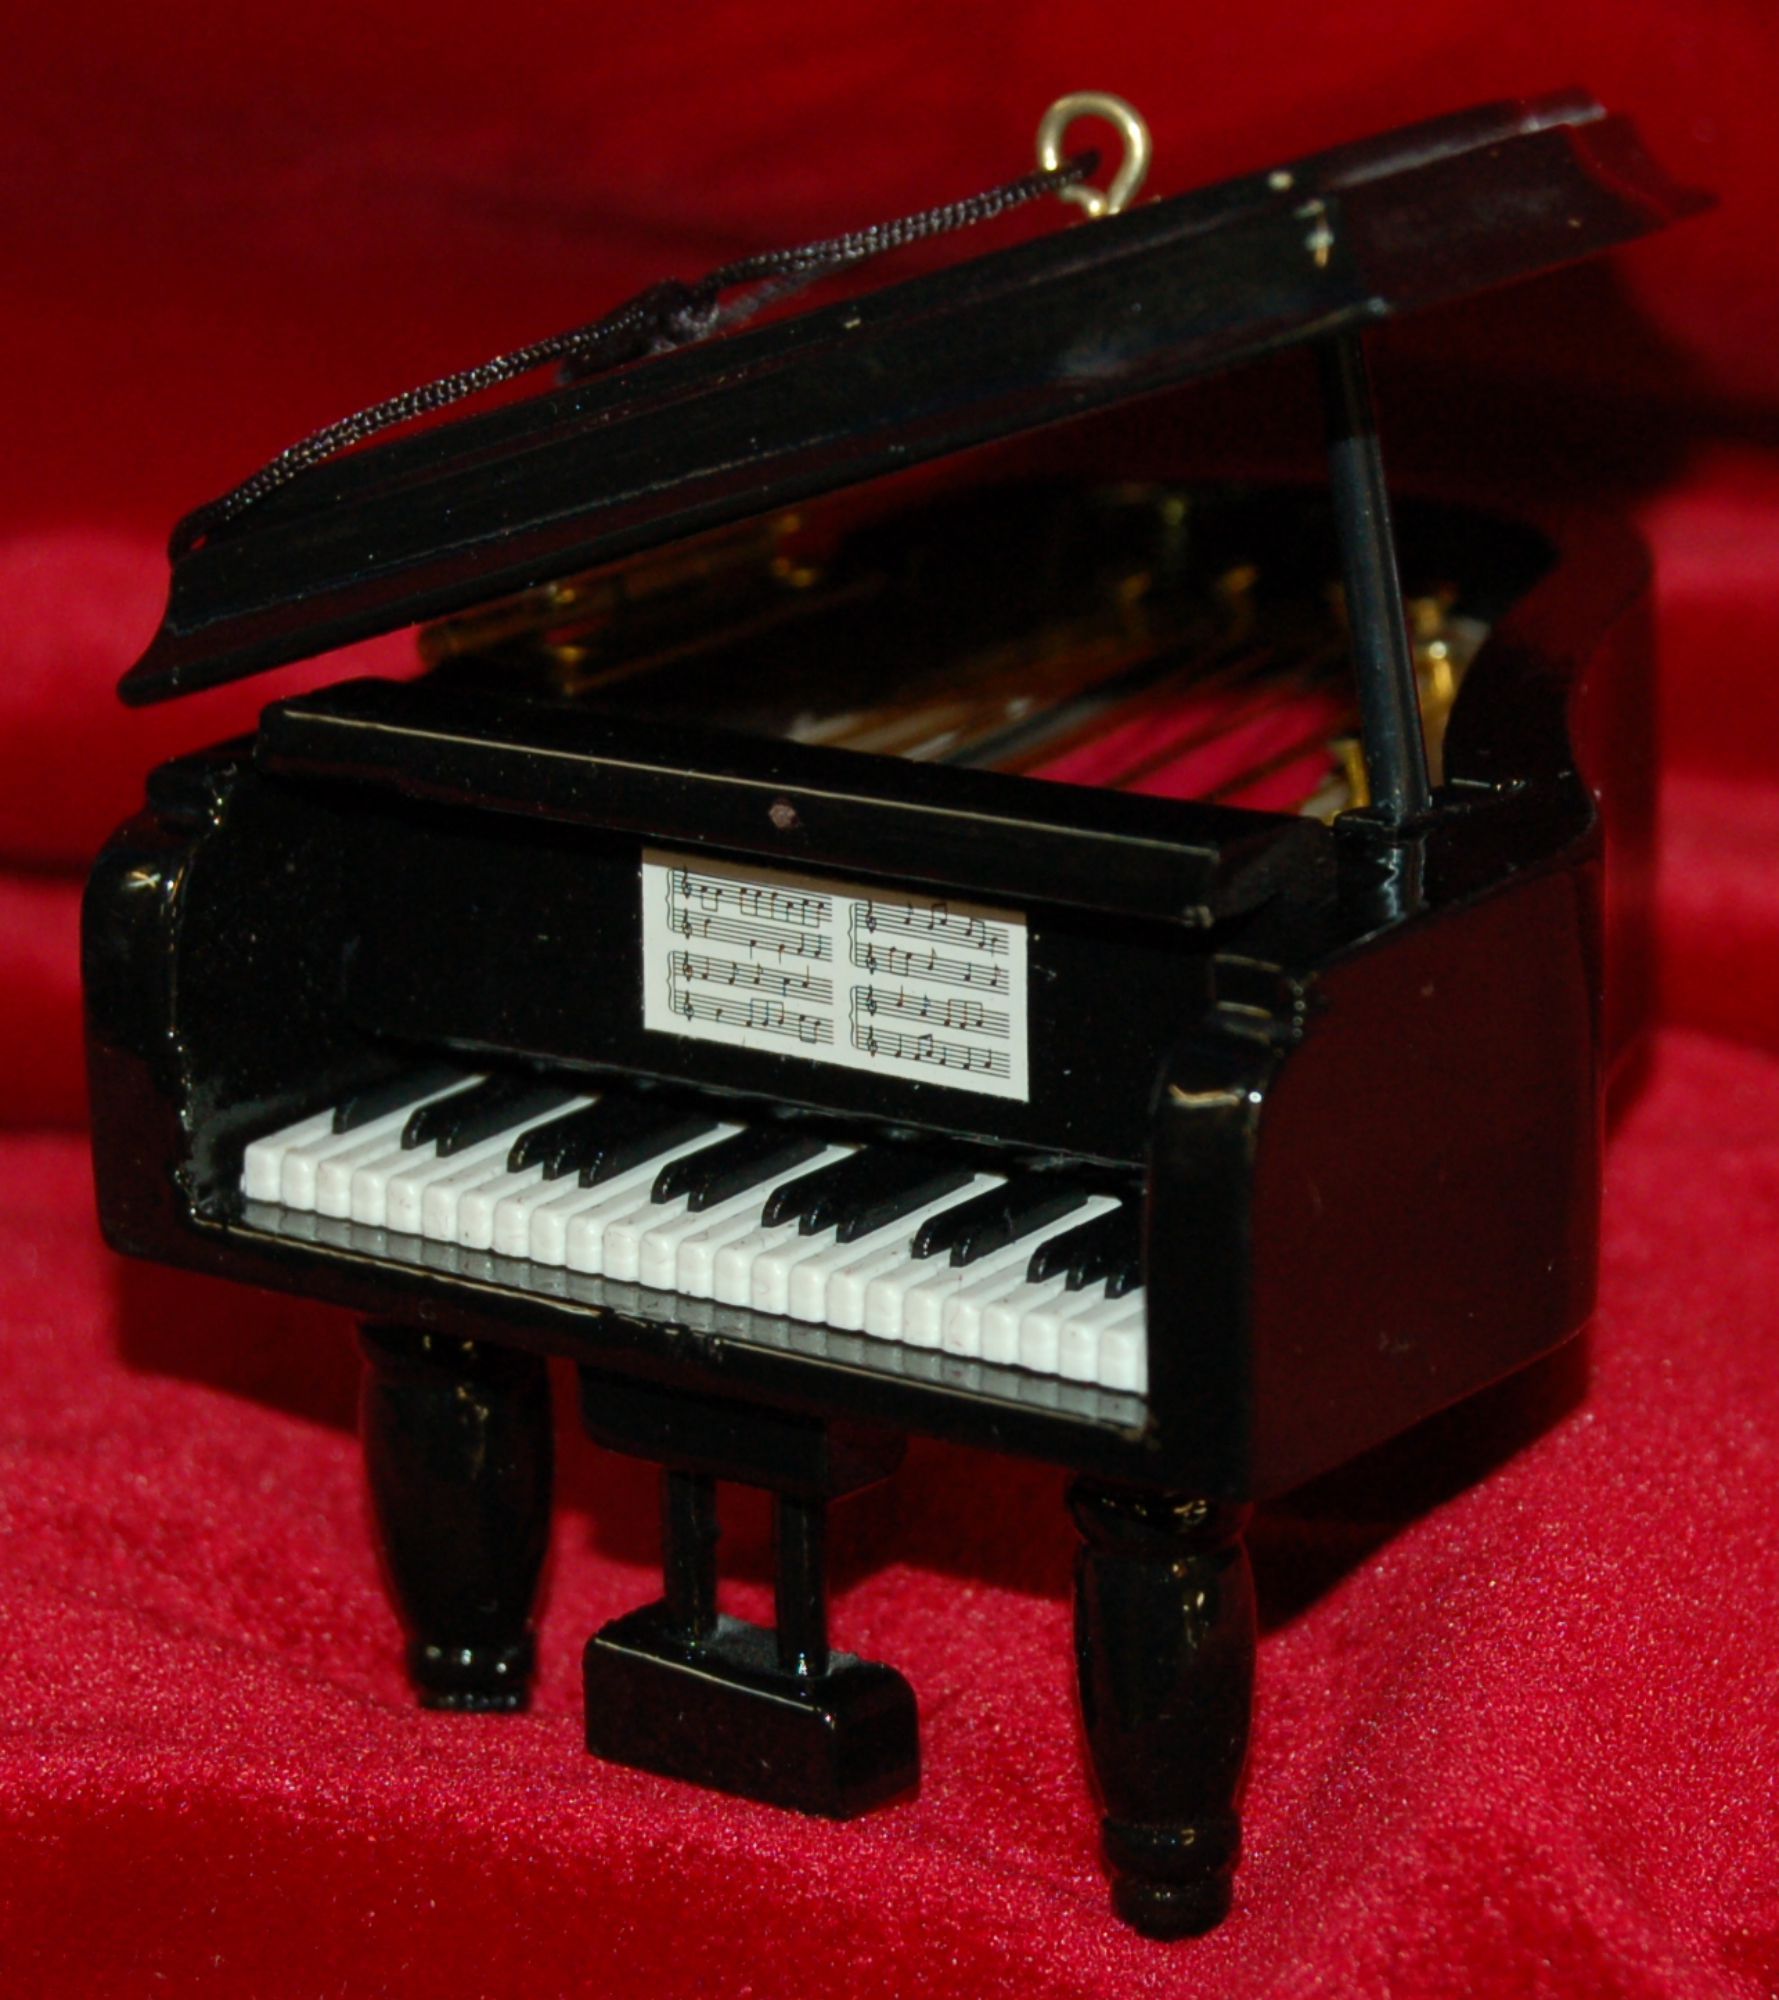 Piano Hand Crafted Wood Christmas Ornament Personalized by RussellRhodes.com